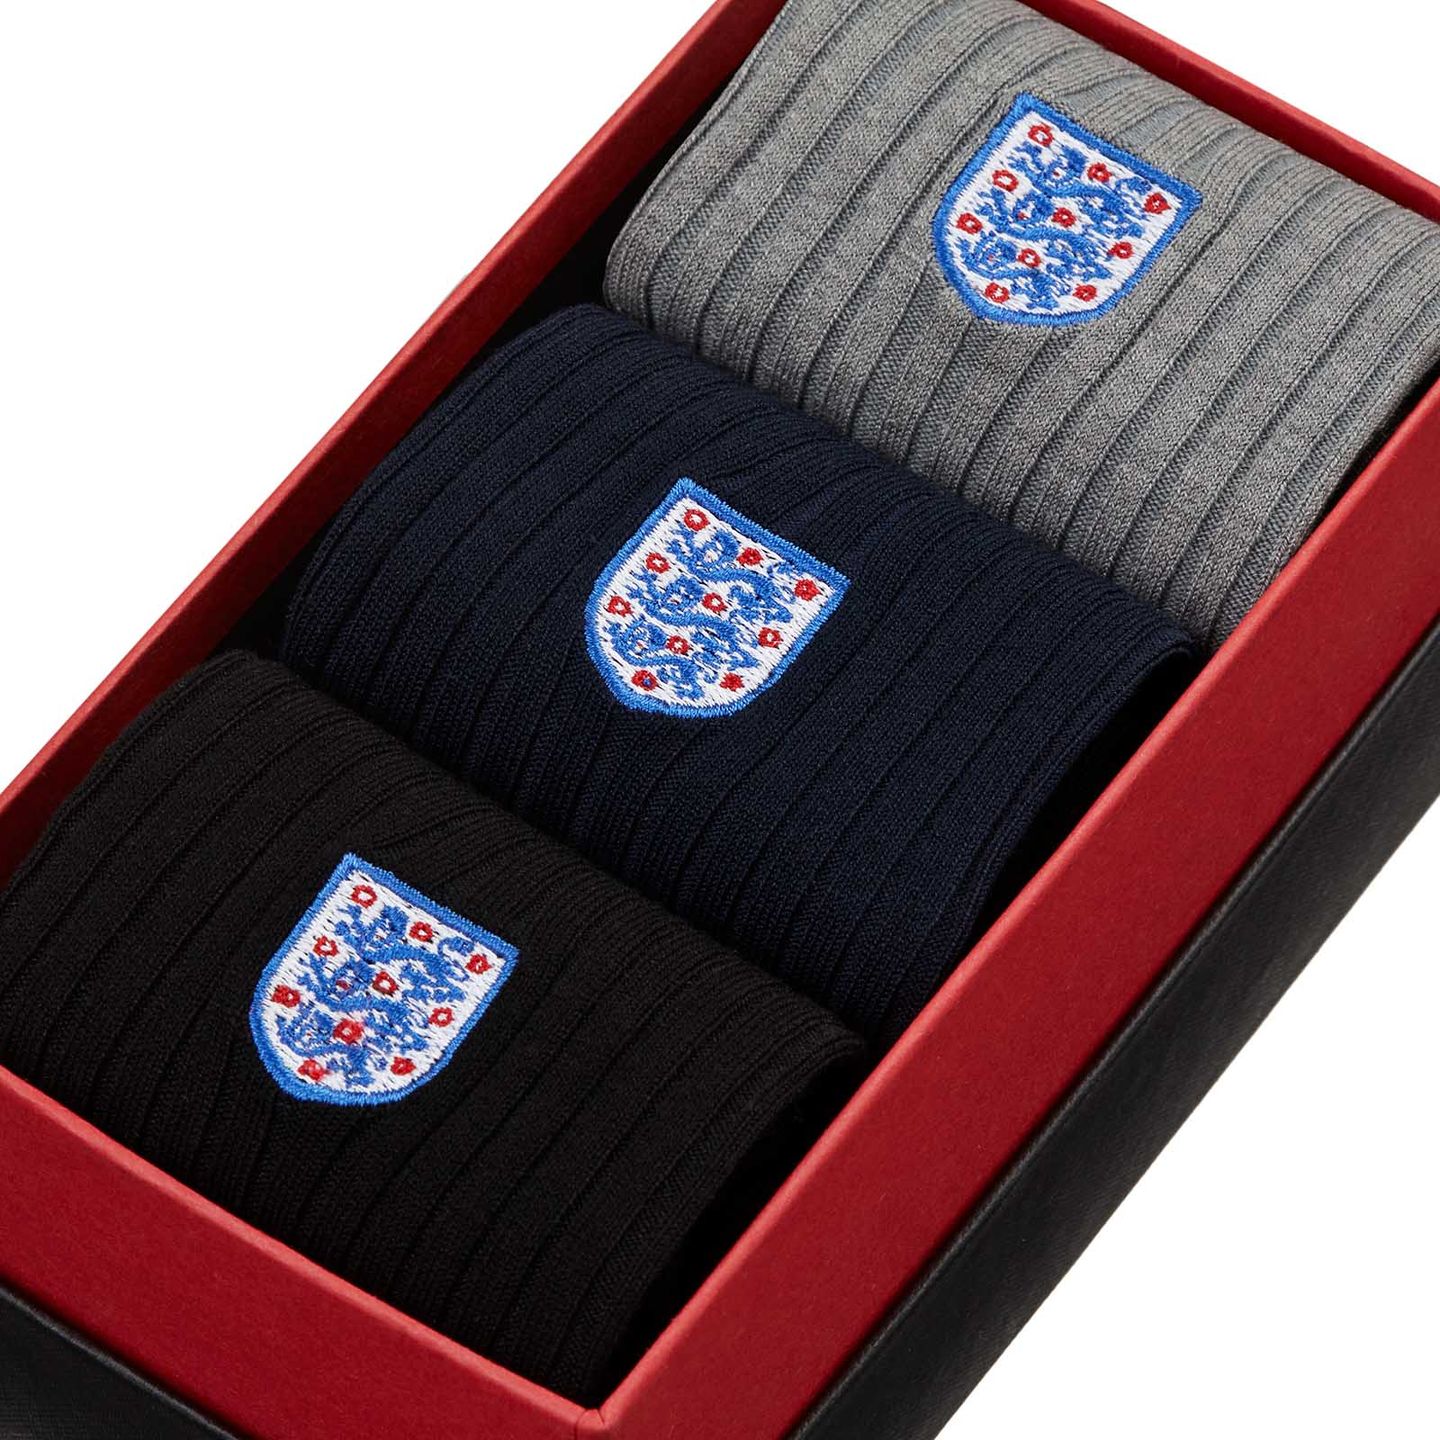 3 pairs of 3 lion England socks in black, navy and grey